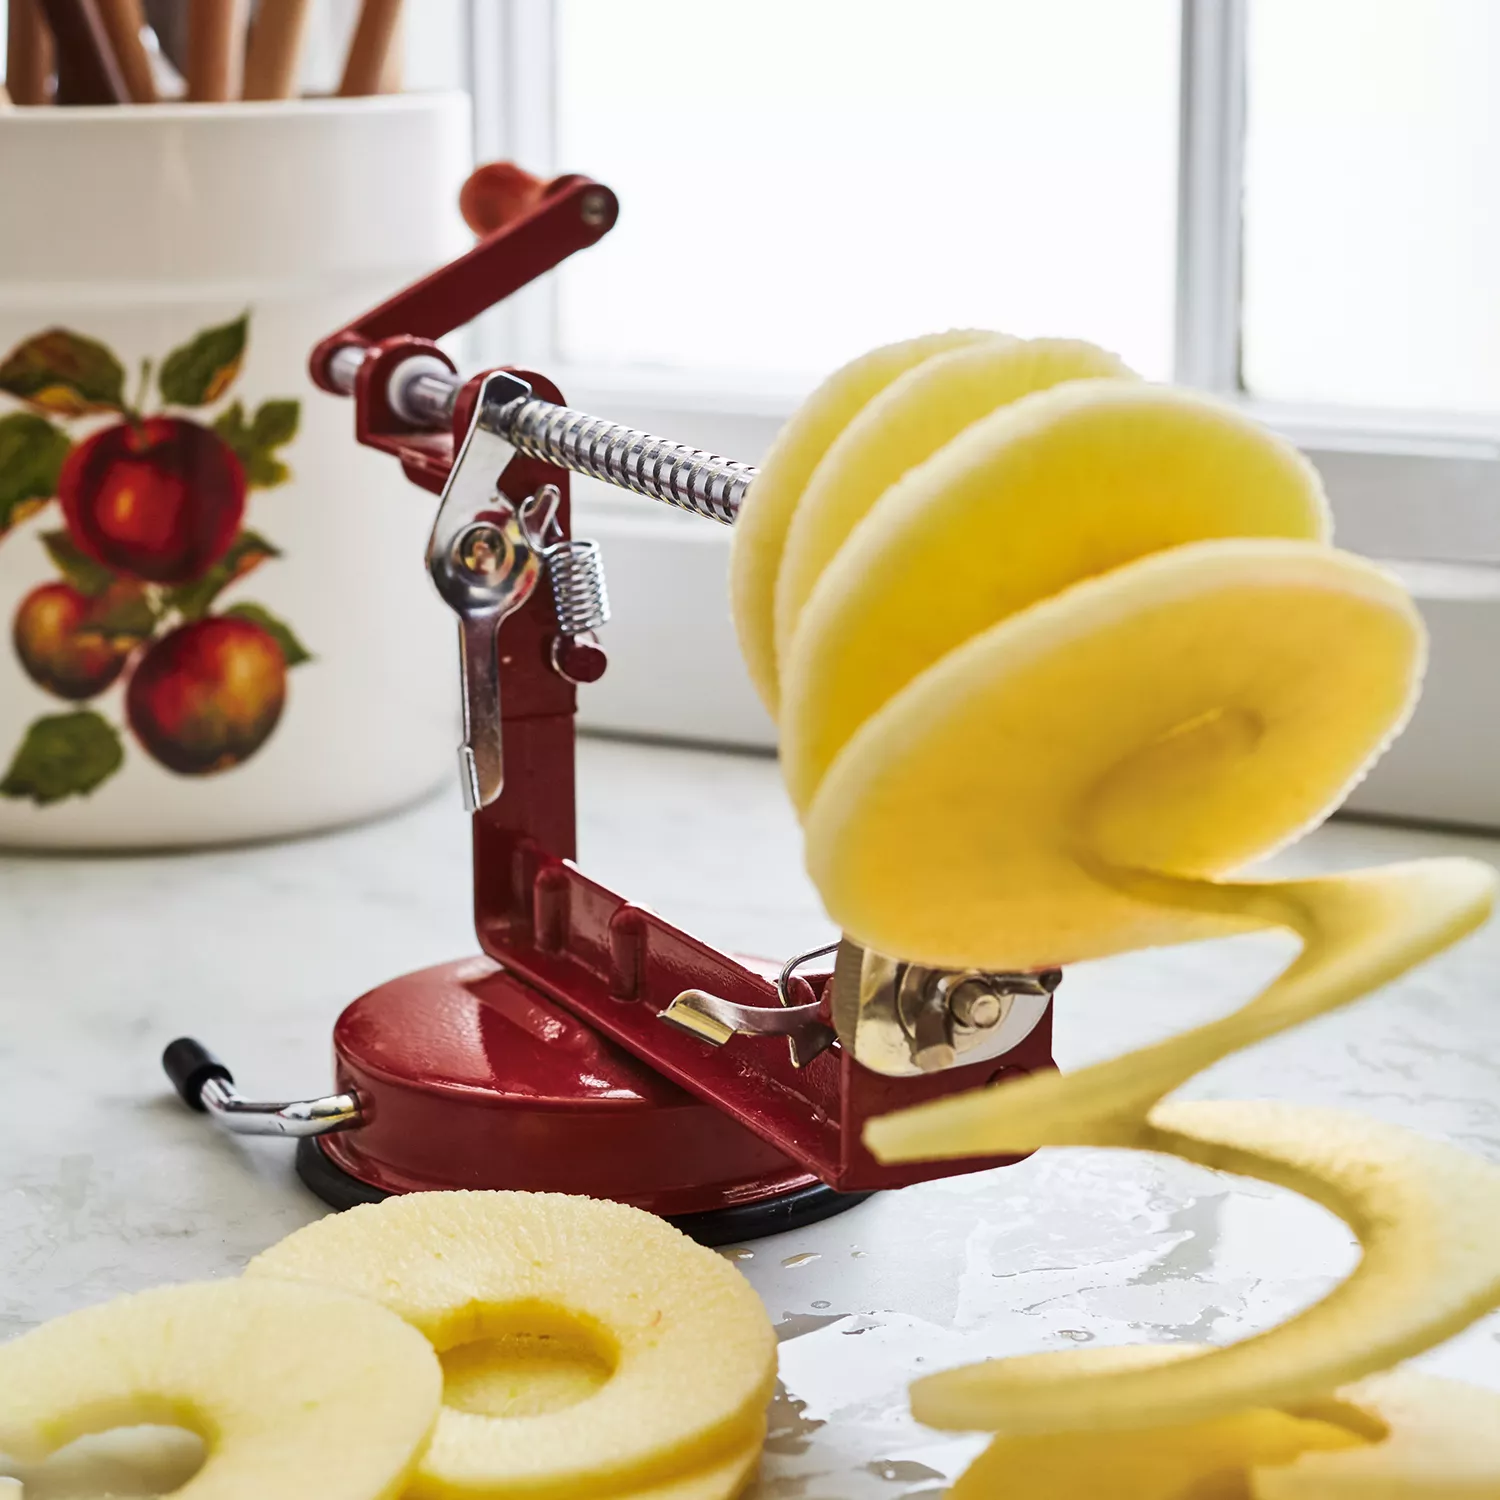 Pampered Chef Apple Peeler, Corer, slicer stand and Cuisinart